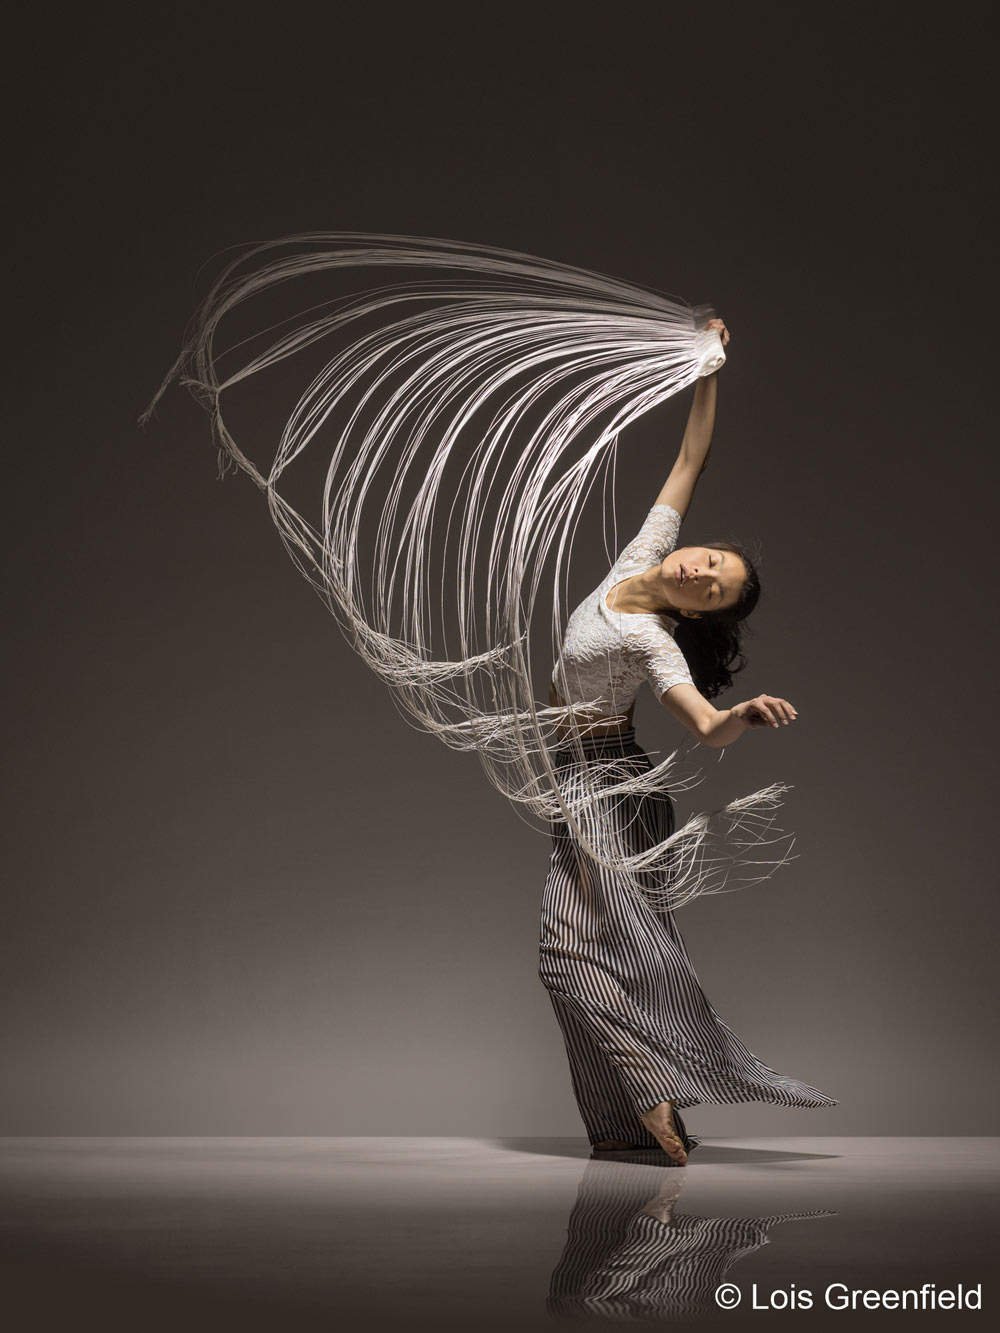 Jye-Hwei Lin © Lois Greenfield. All Rights Reserved